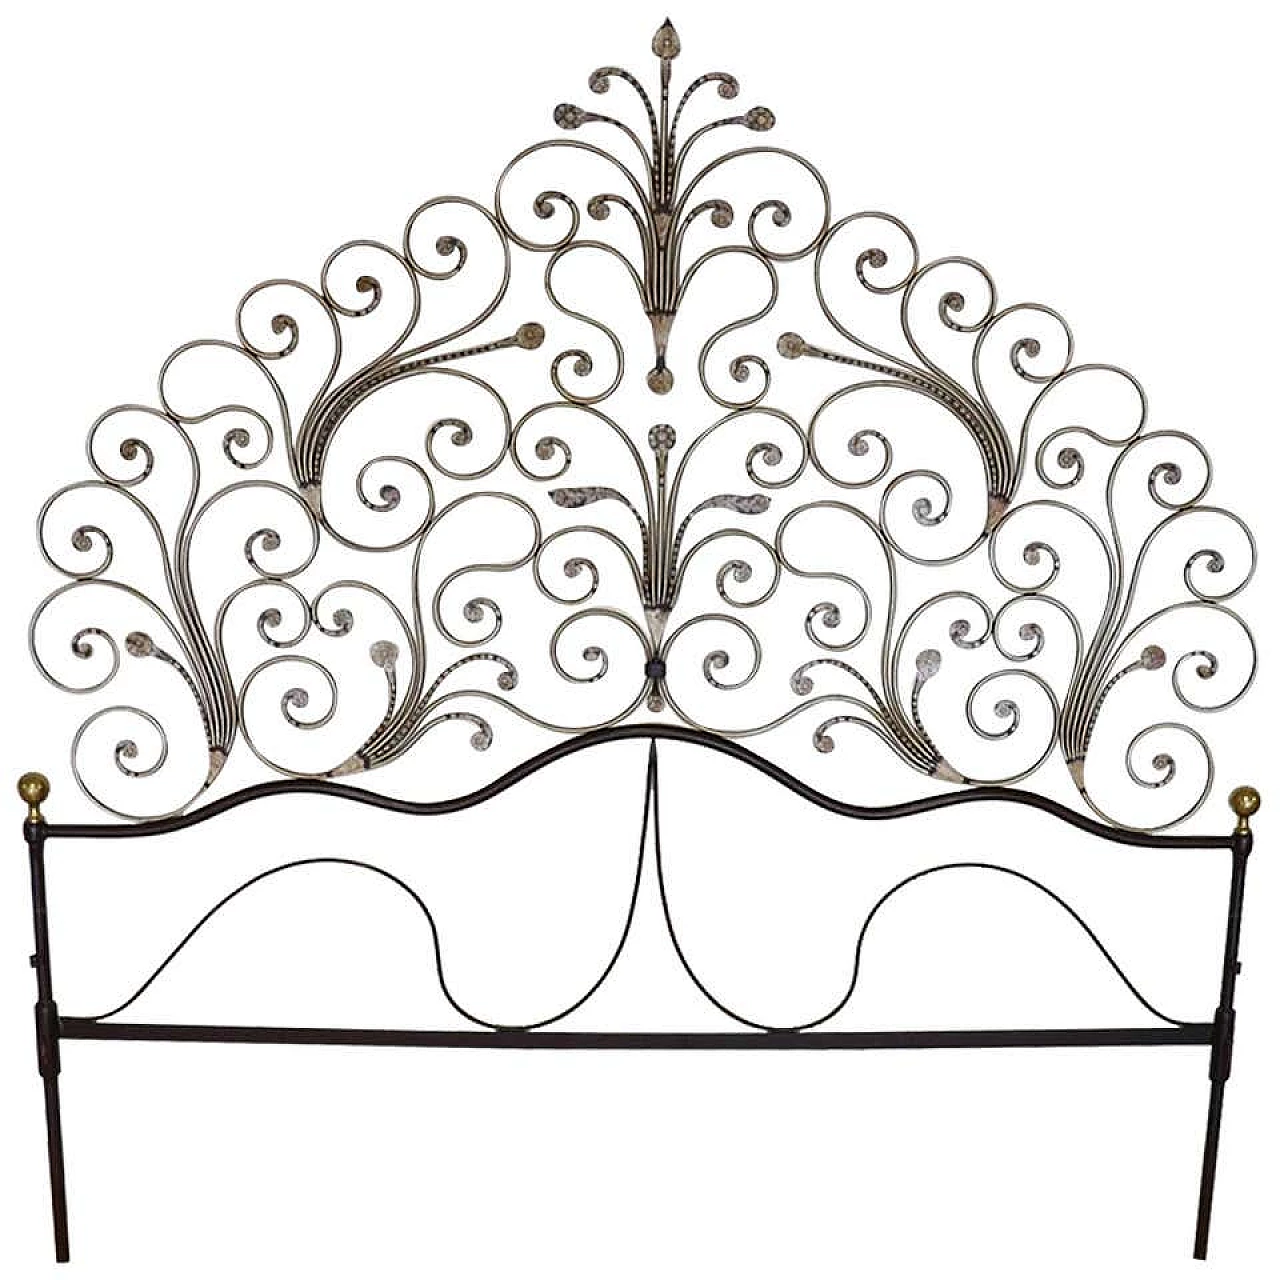 Genoese peacock bedhead in wrought iron and gilding, early 20th century 1277815